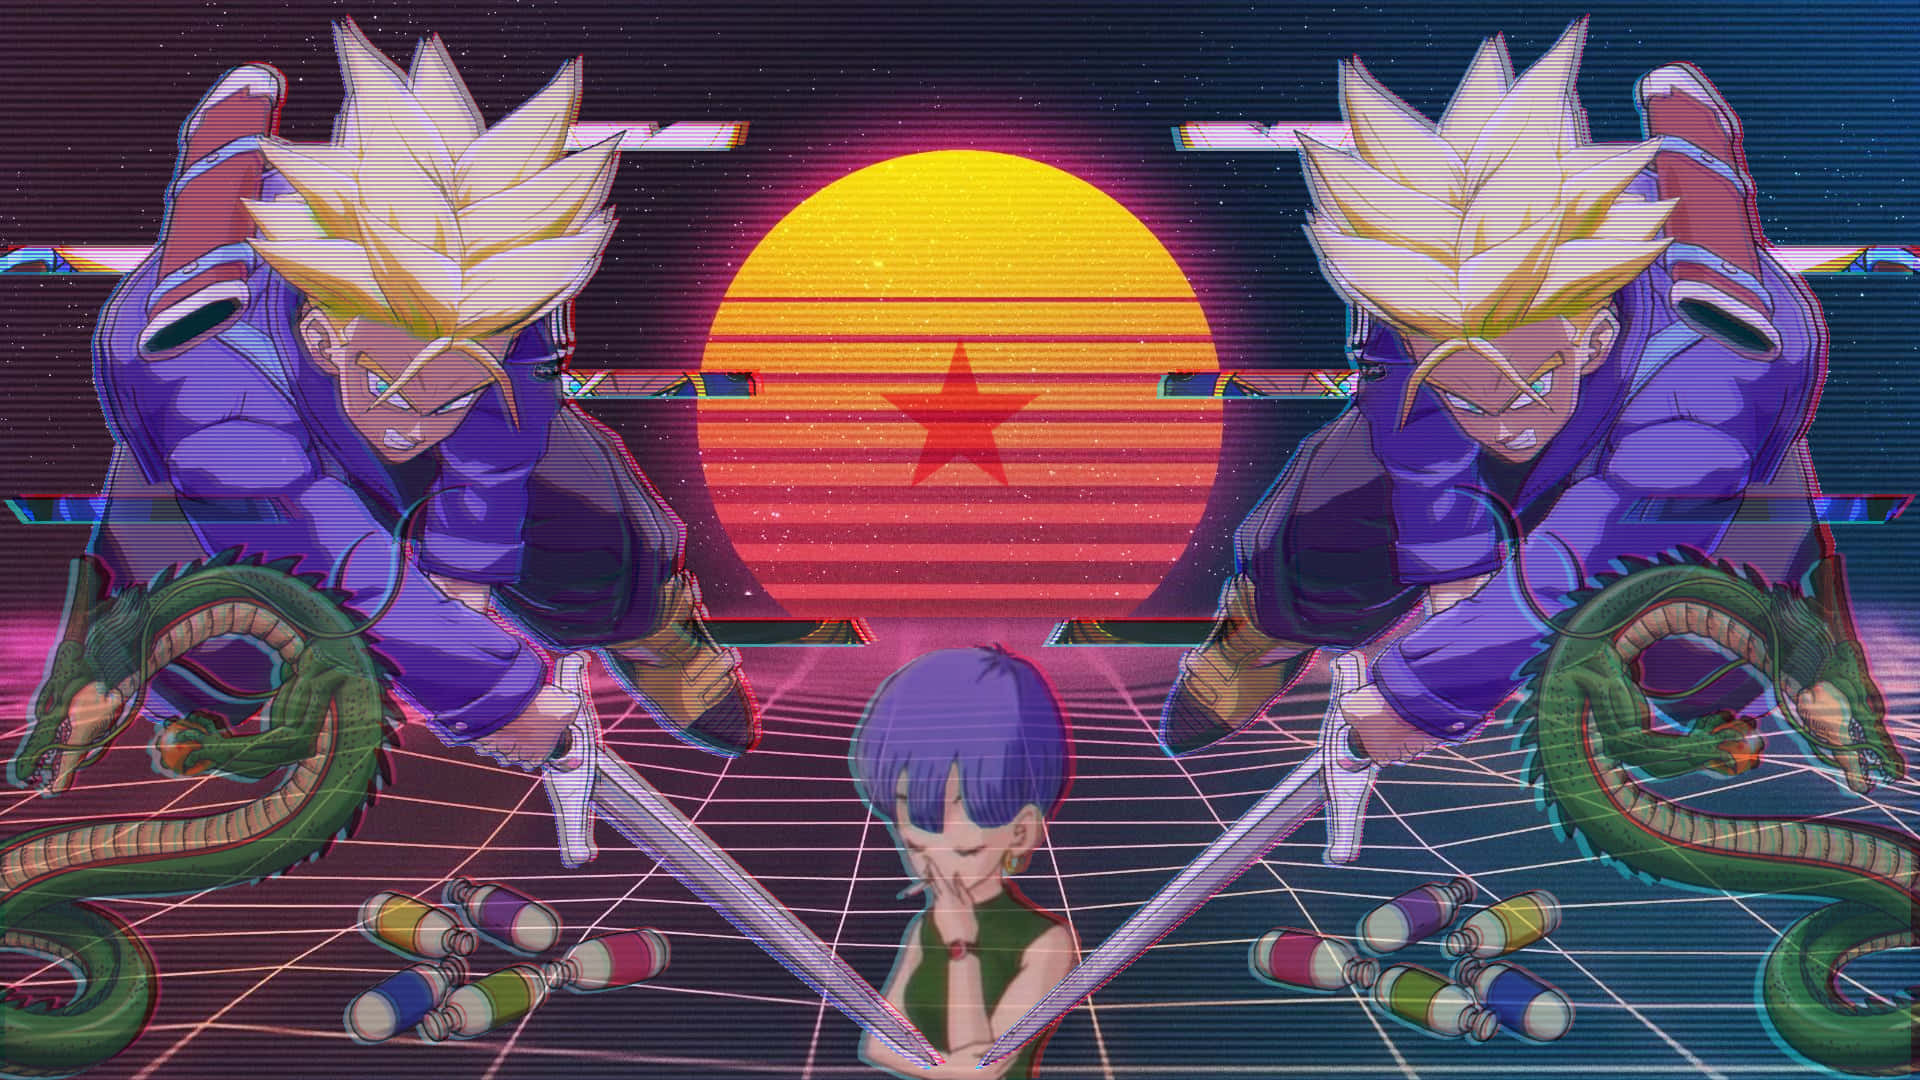 Trunks Defeating Frieza in Dragon Ball Z Wallpaper